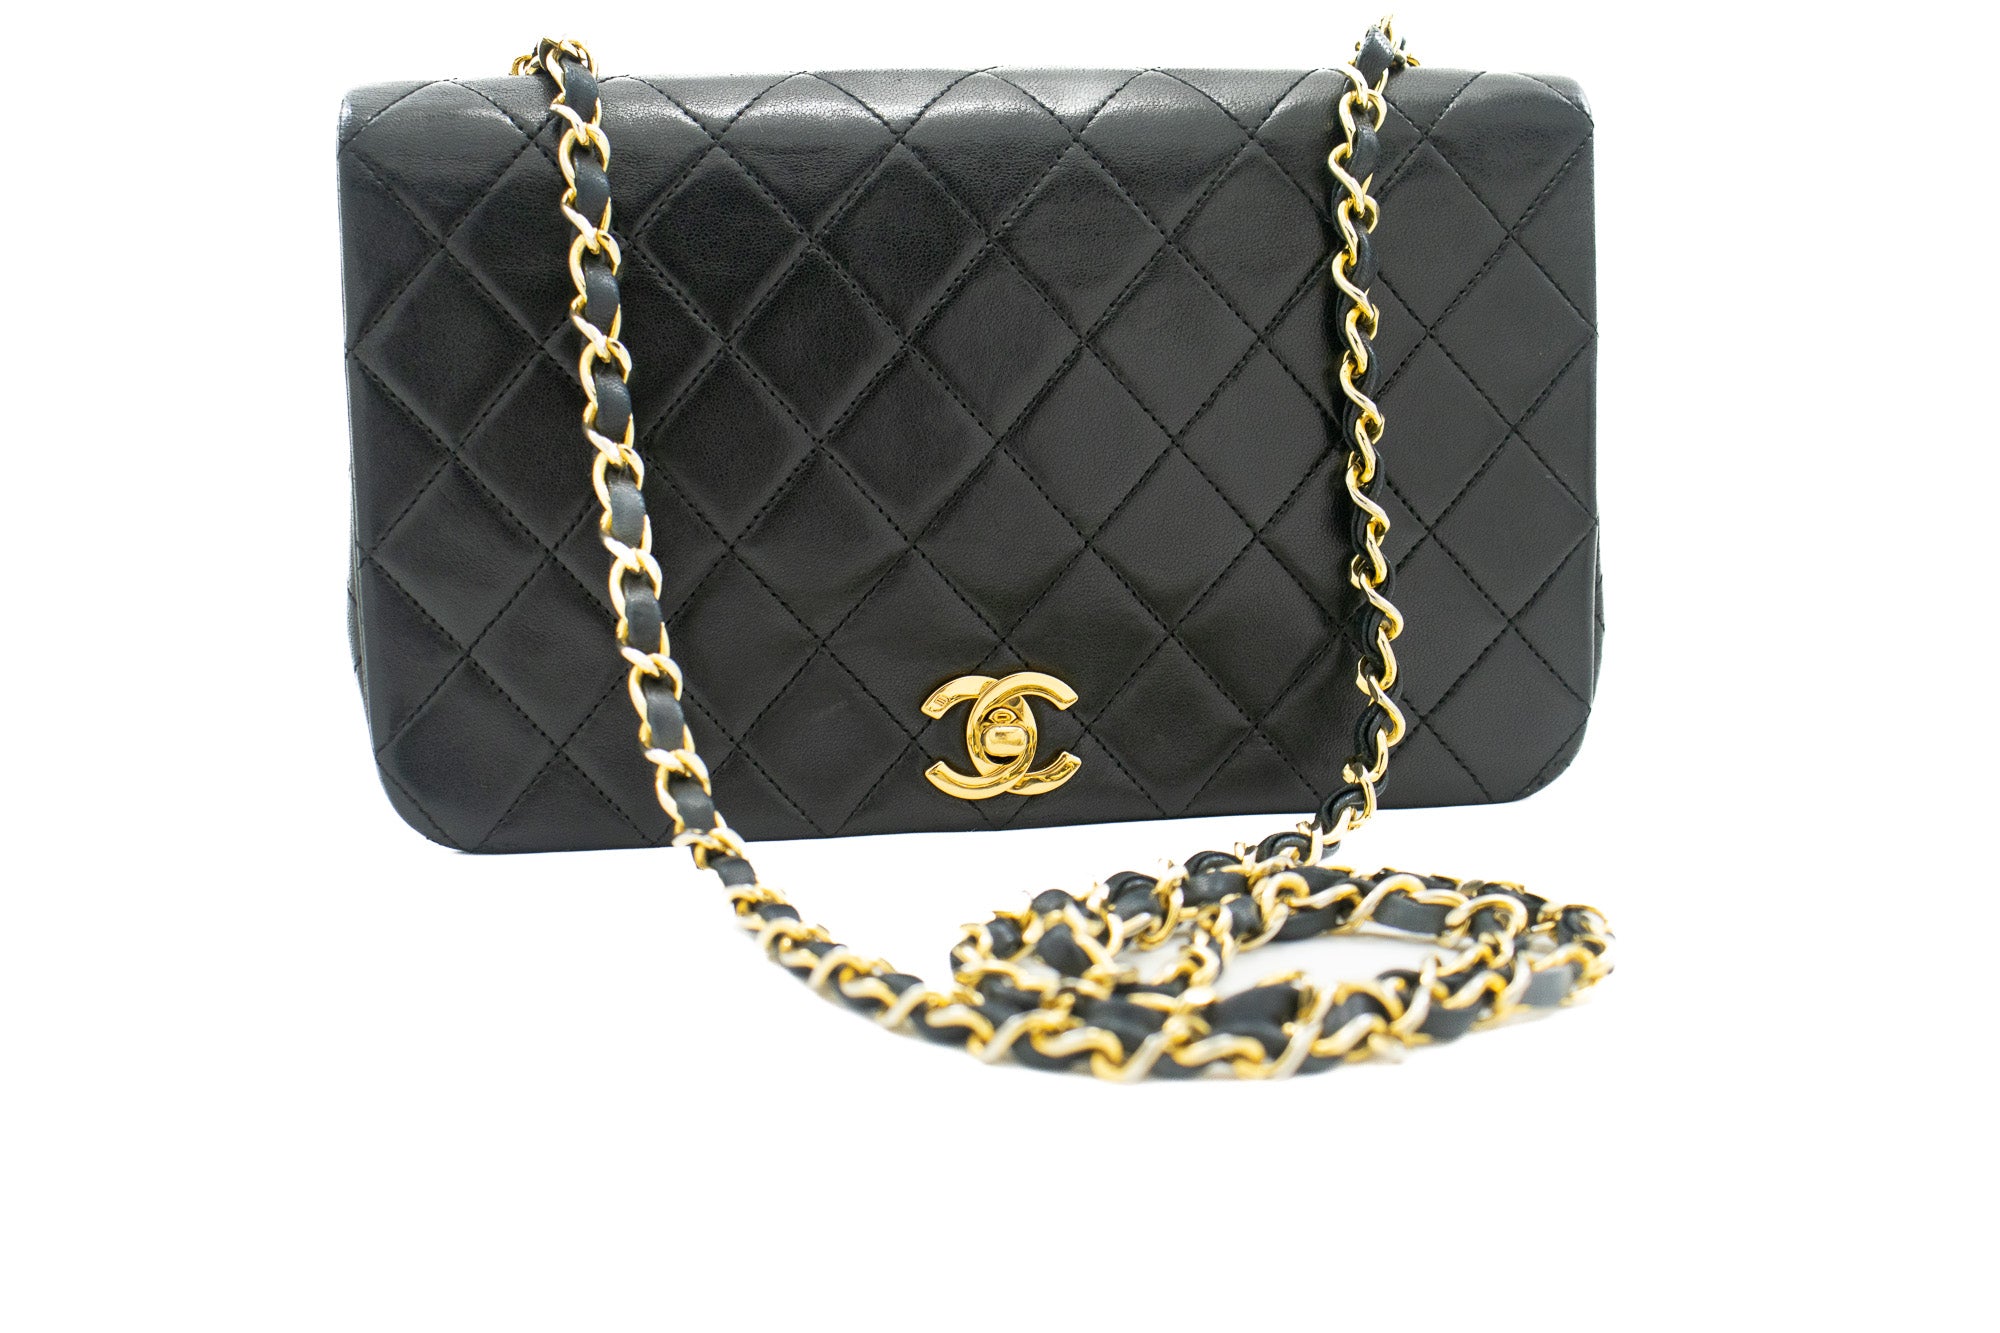 Chanel Full Flap Chain Shoulder Bag Black Quilted Lambskin Purse J65